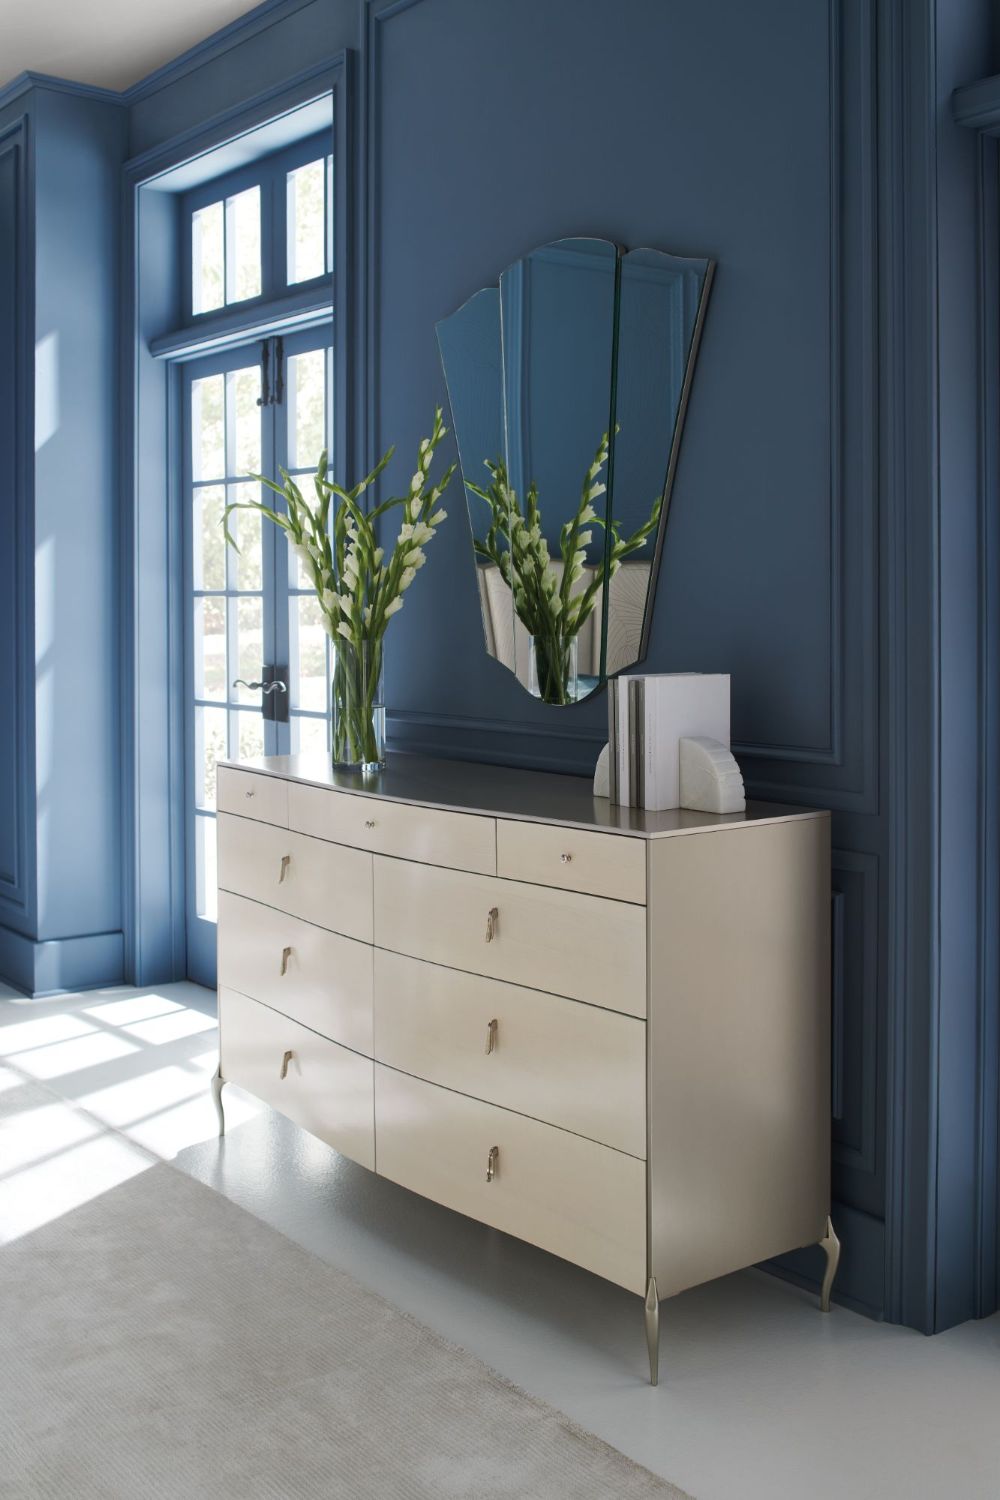  Caracole-Caracole Classic Dress To Impress Bedroom Dresser-Natural 757 